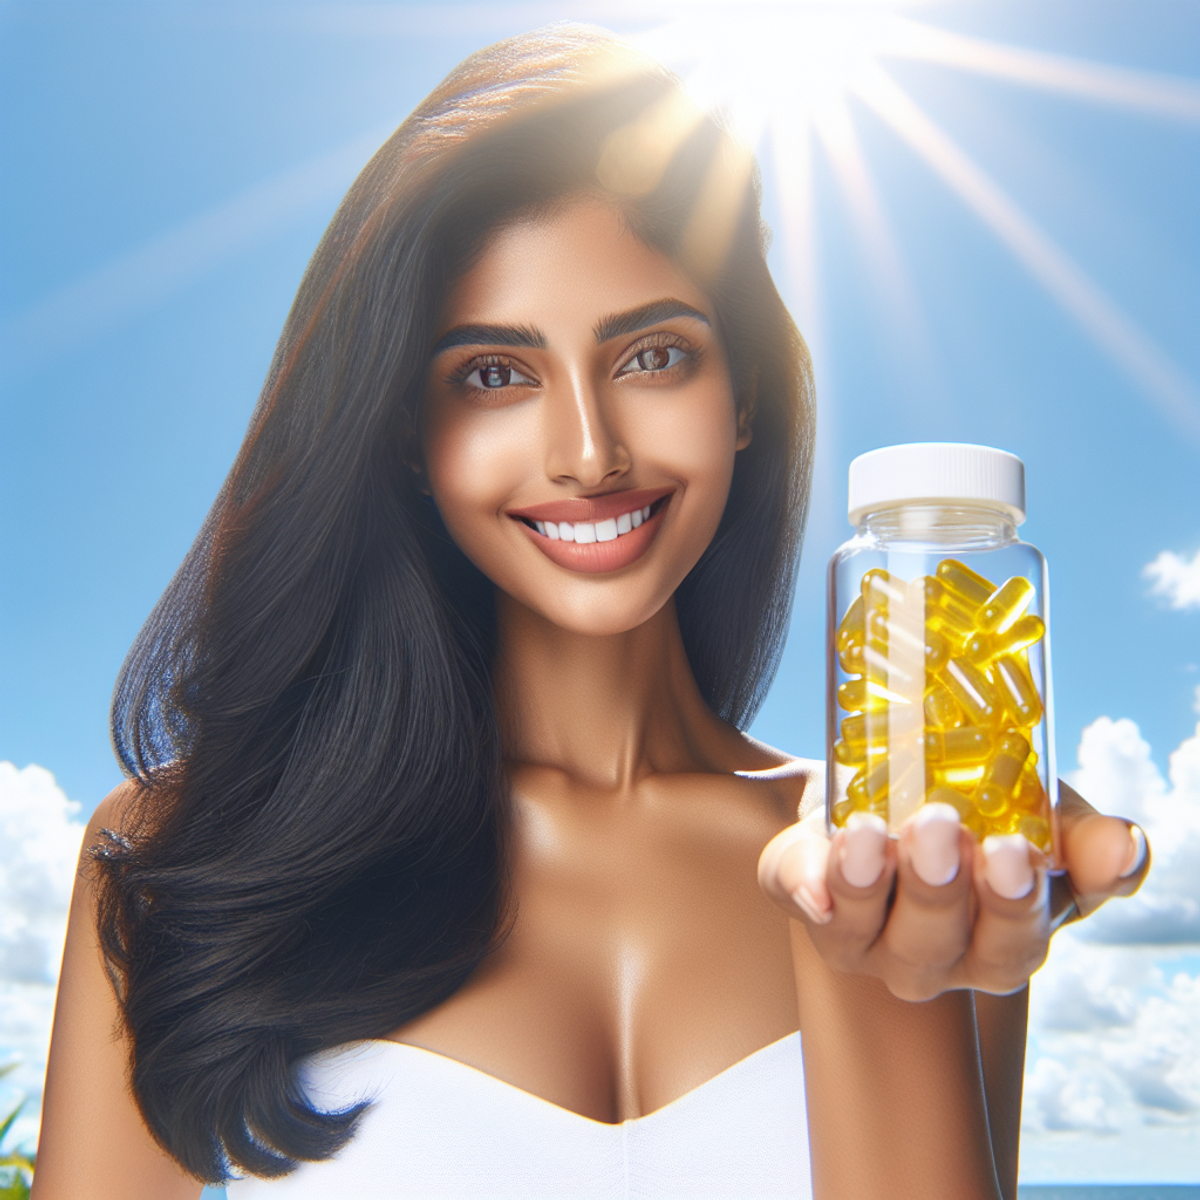 A South Asian woman standing under a clear blue sky with bright sun rays shining upon her, holding up a transparent bottle filled with yellow capsules, representing Vitamin D3 K2 5000 I.U. supplements.